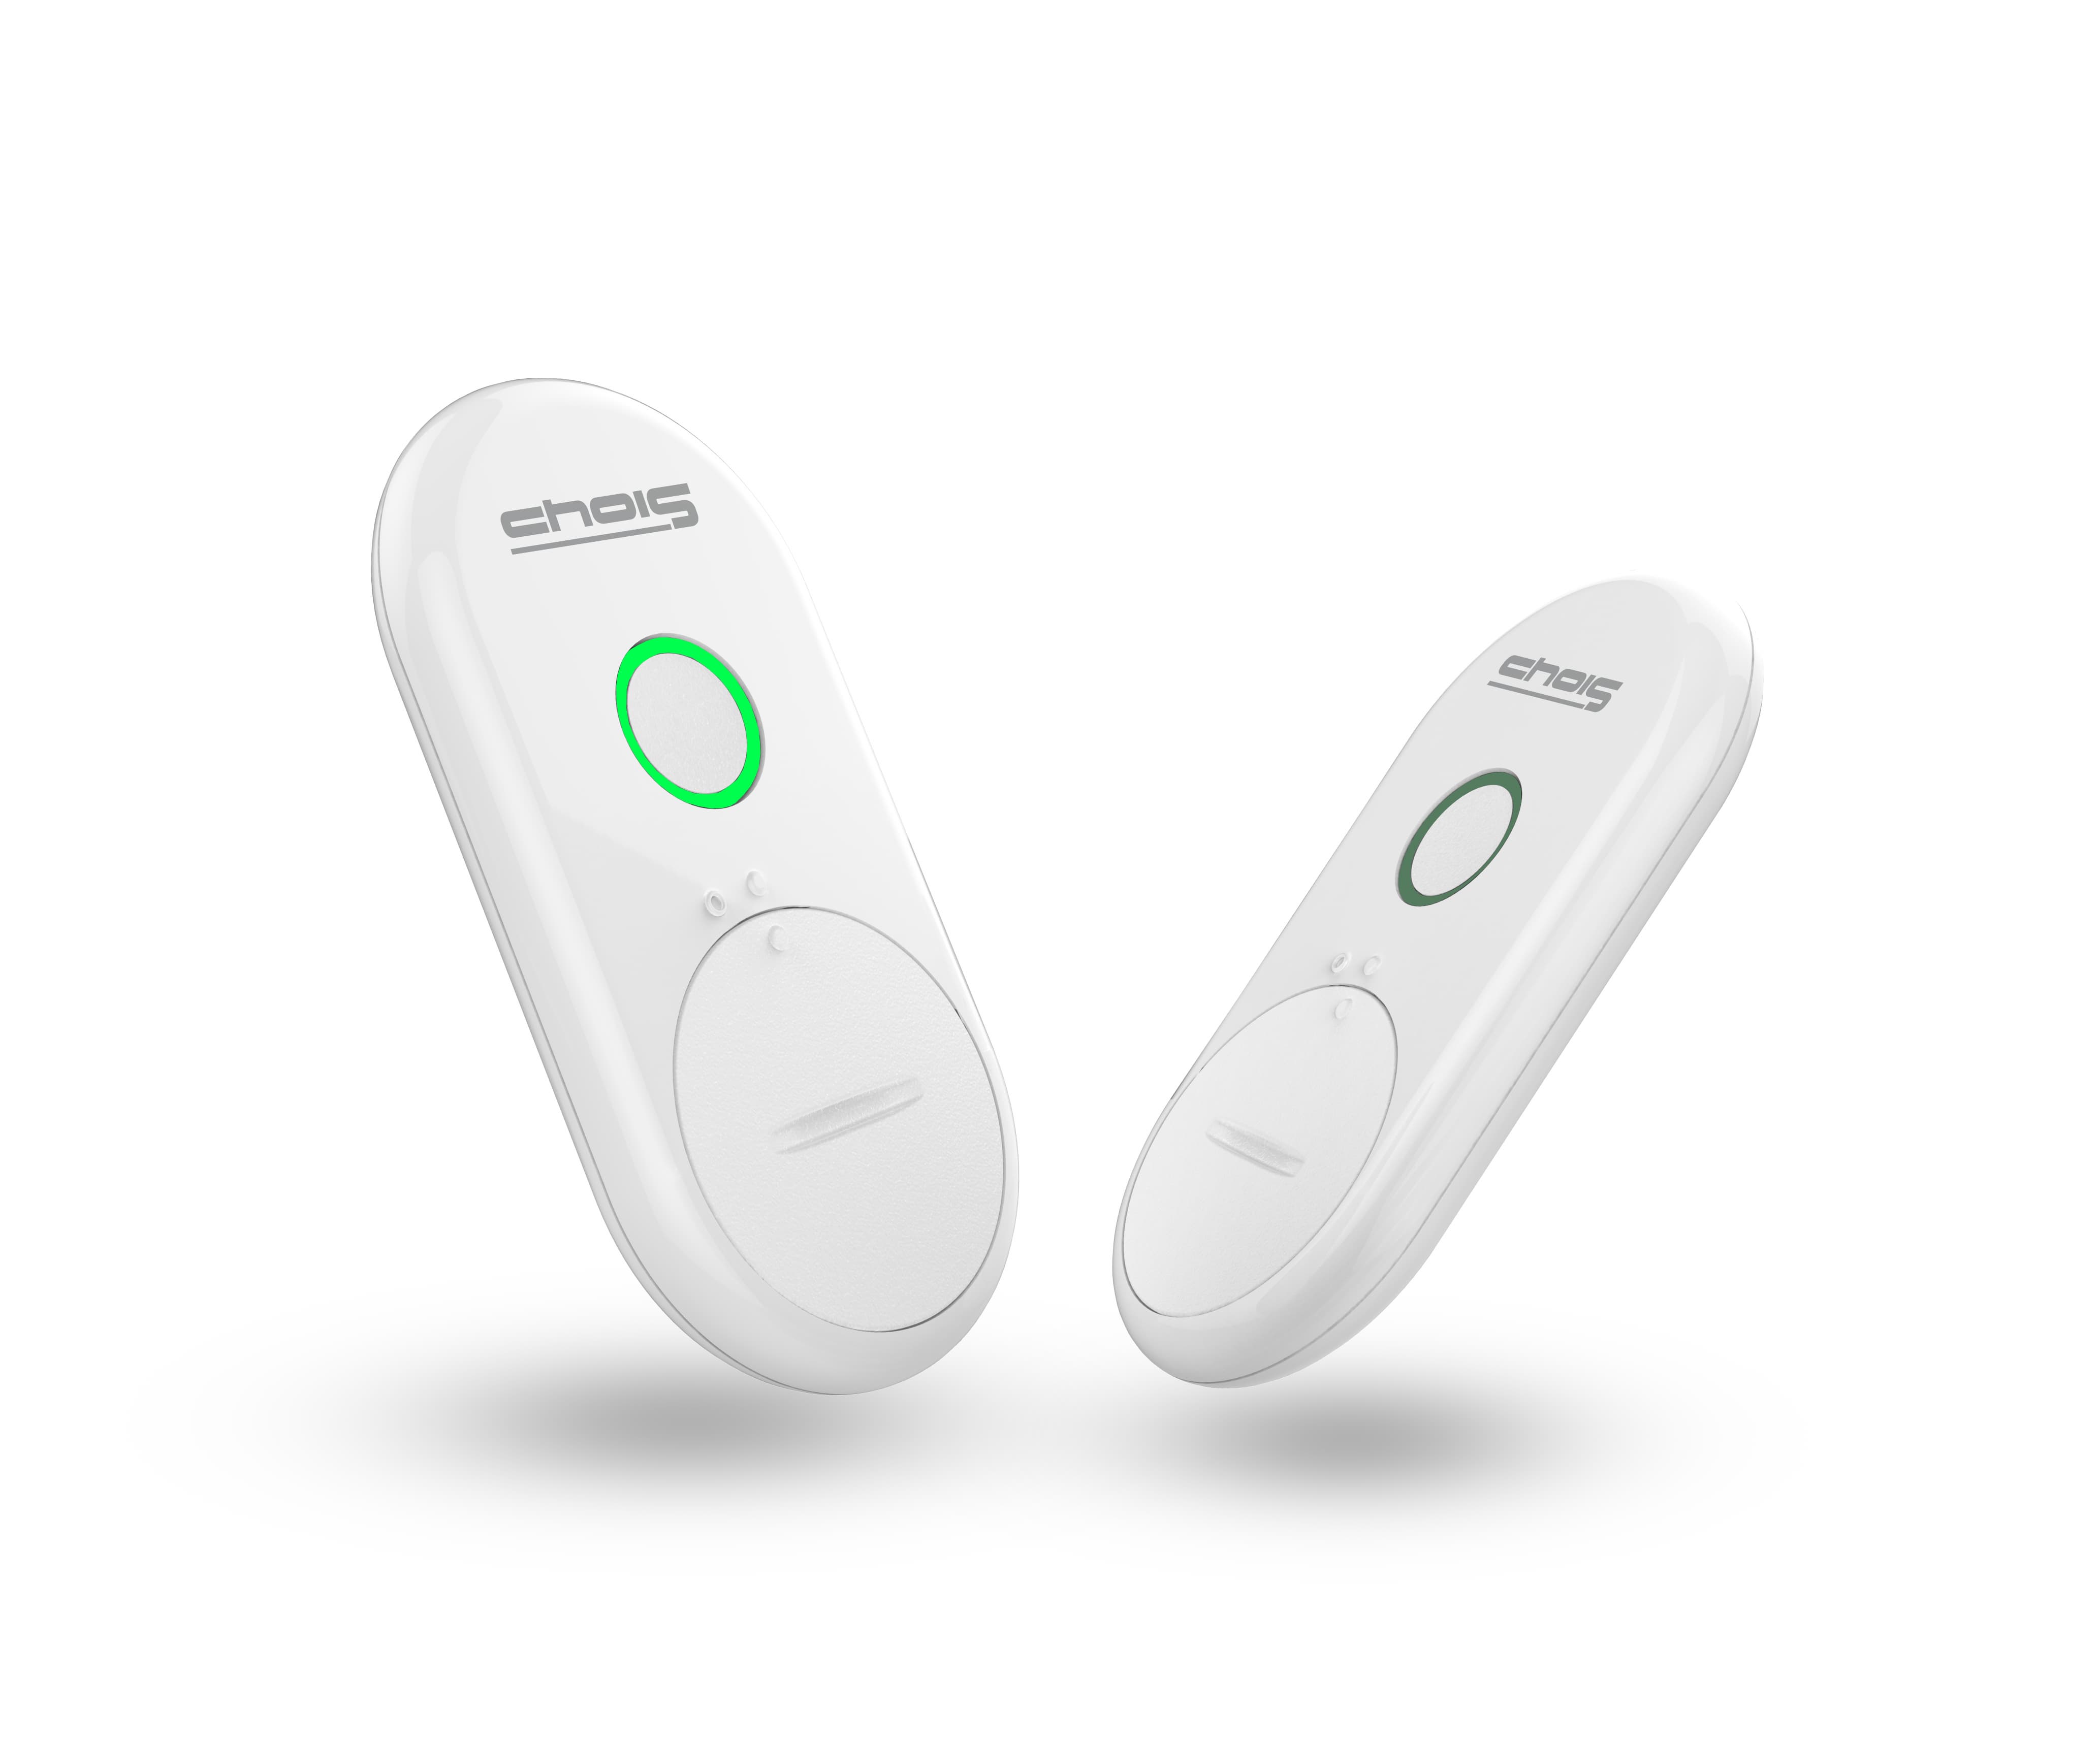 wireless monitoring body thermometer for kids and patients